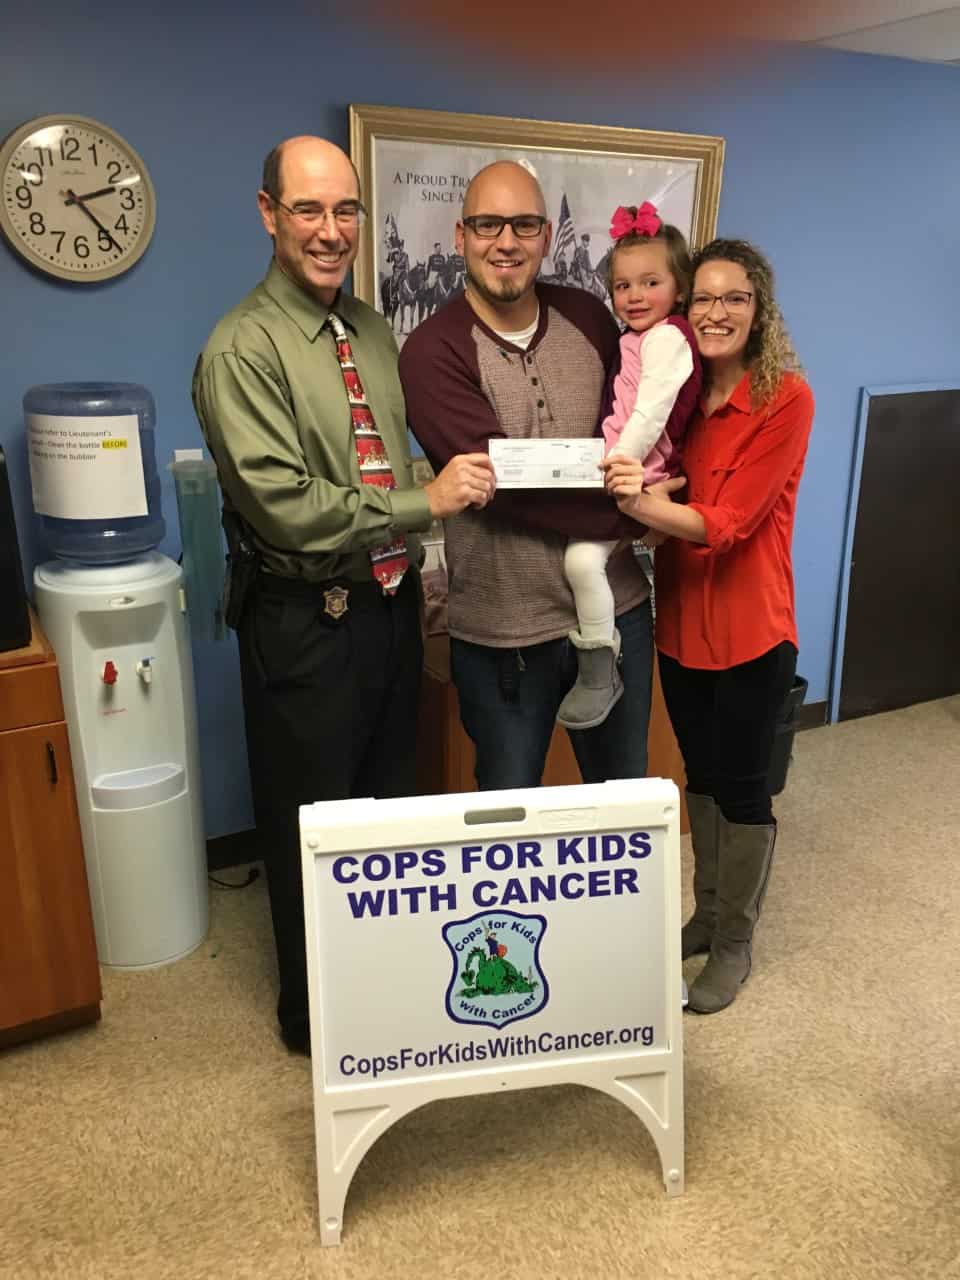 CFKWC went to the State Police barracks in Leominster to present a check for $5,000 to parents for their 2 year old daughter